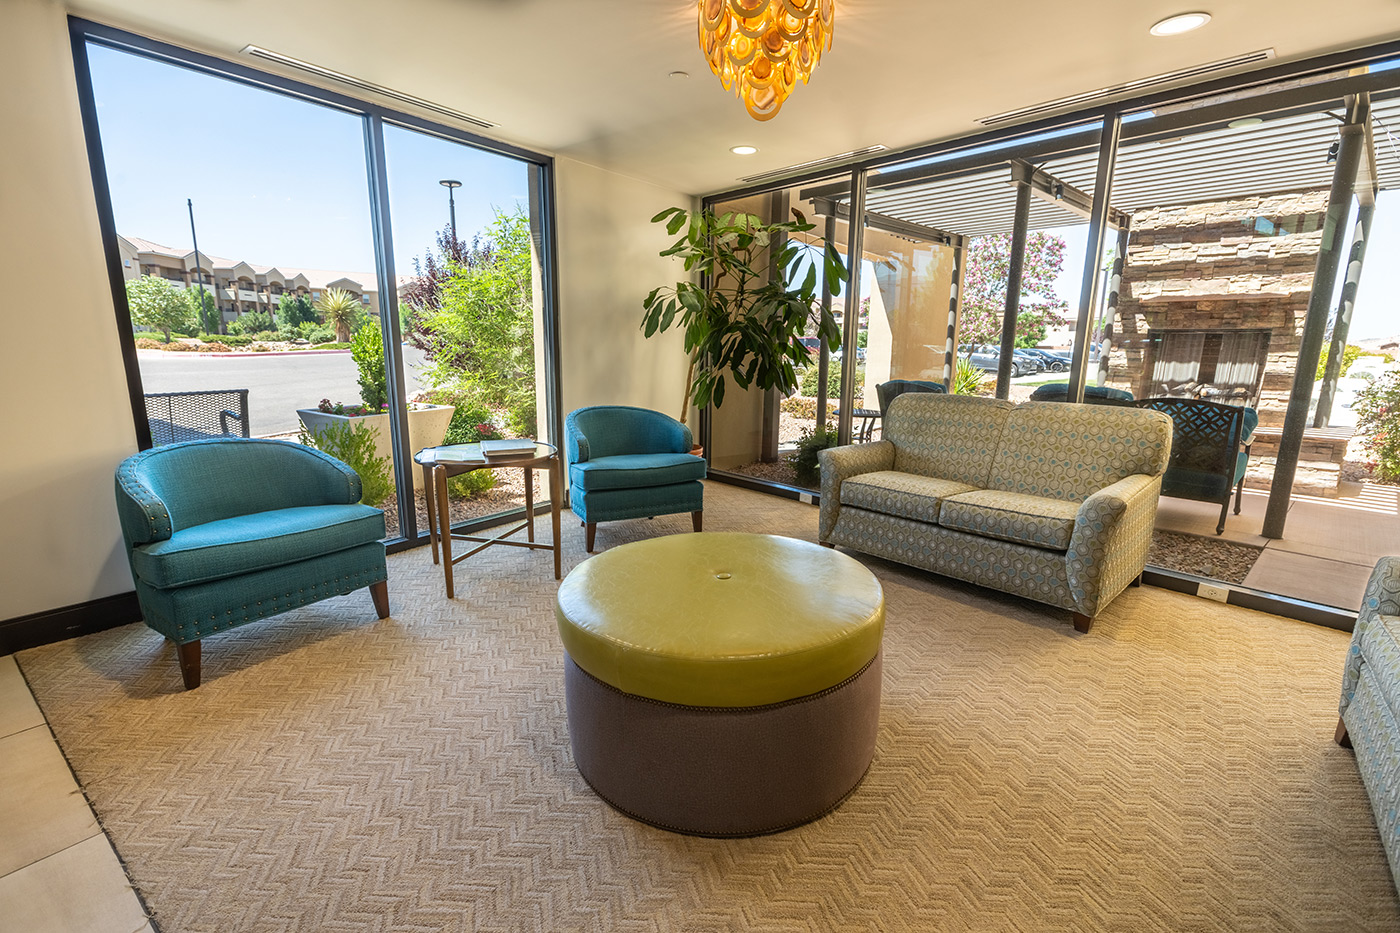 The Watermark at Cherry Hills interior lounge seating with round green ottoman.